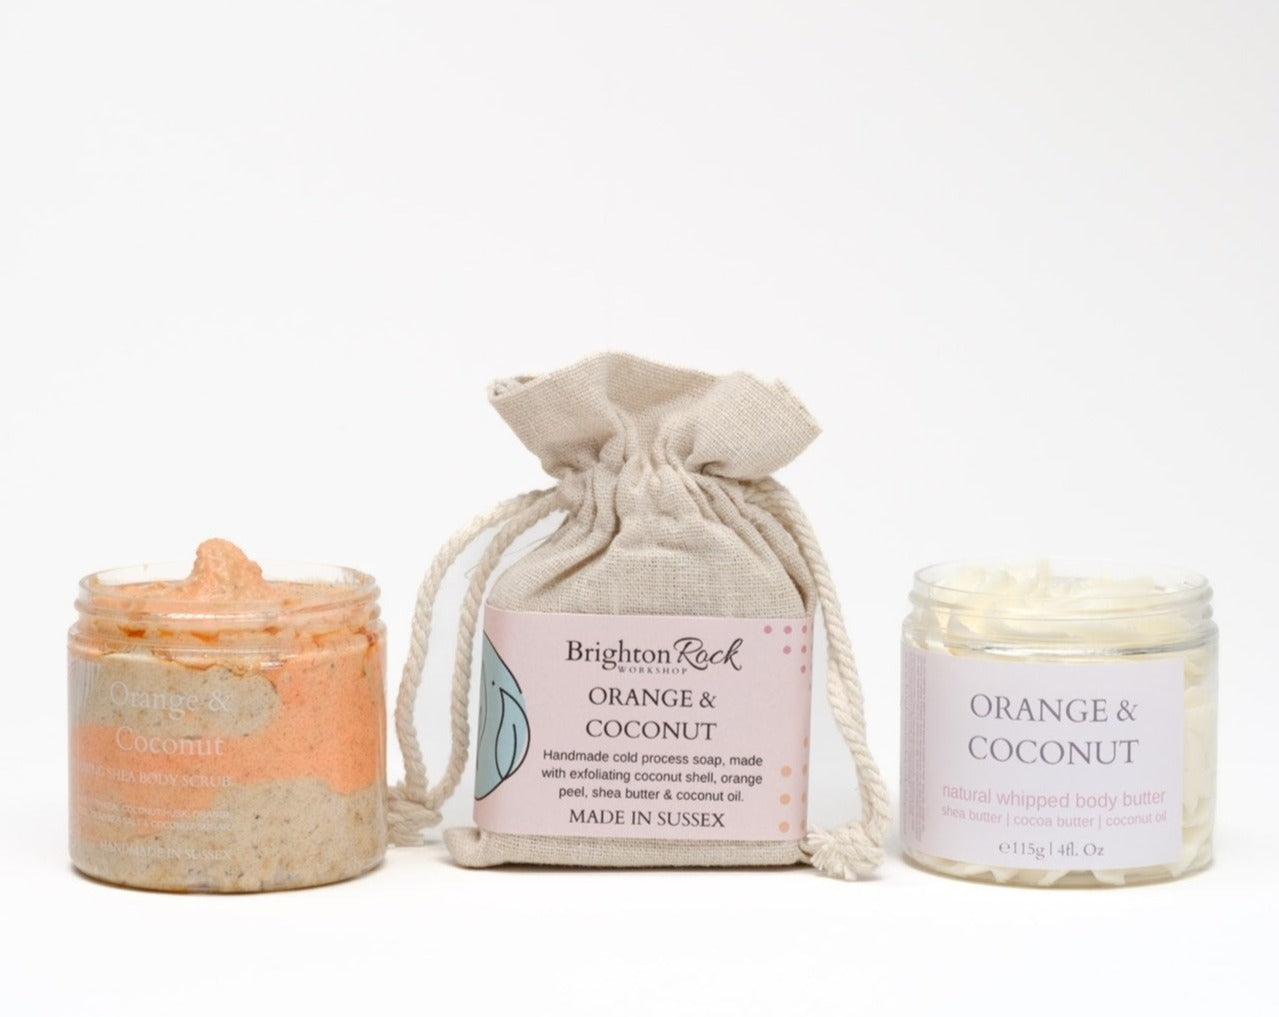 Our Orange & coconut shower collection makes you feel like you are on a sunny beach vacay in the Seychelles! body butter, soap and 280g scrub with coconut shell fibre, ground orange peel, and coconut sugar exfoliants in a shea butter soap base. vegan friendly, cruelty free, handmade in Brighton, UK.